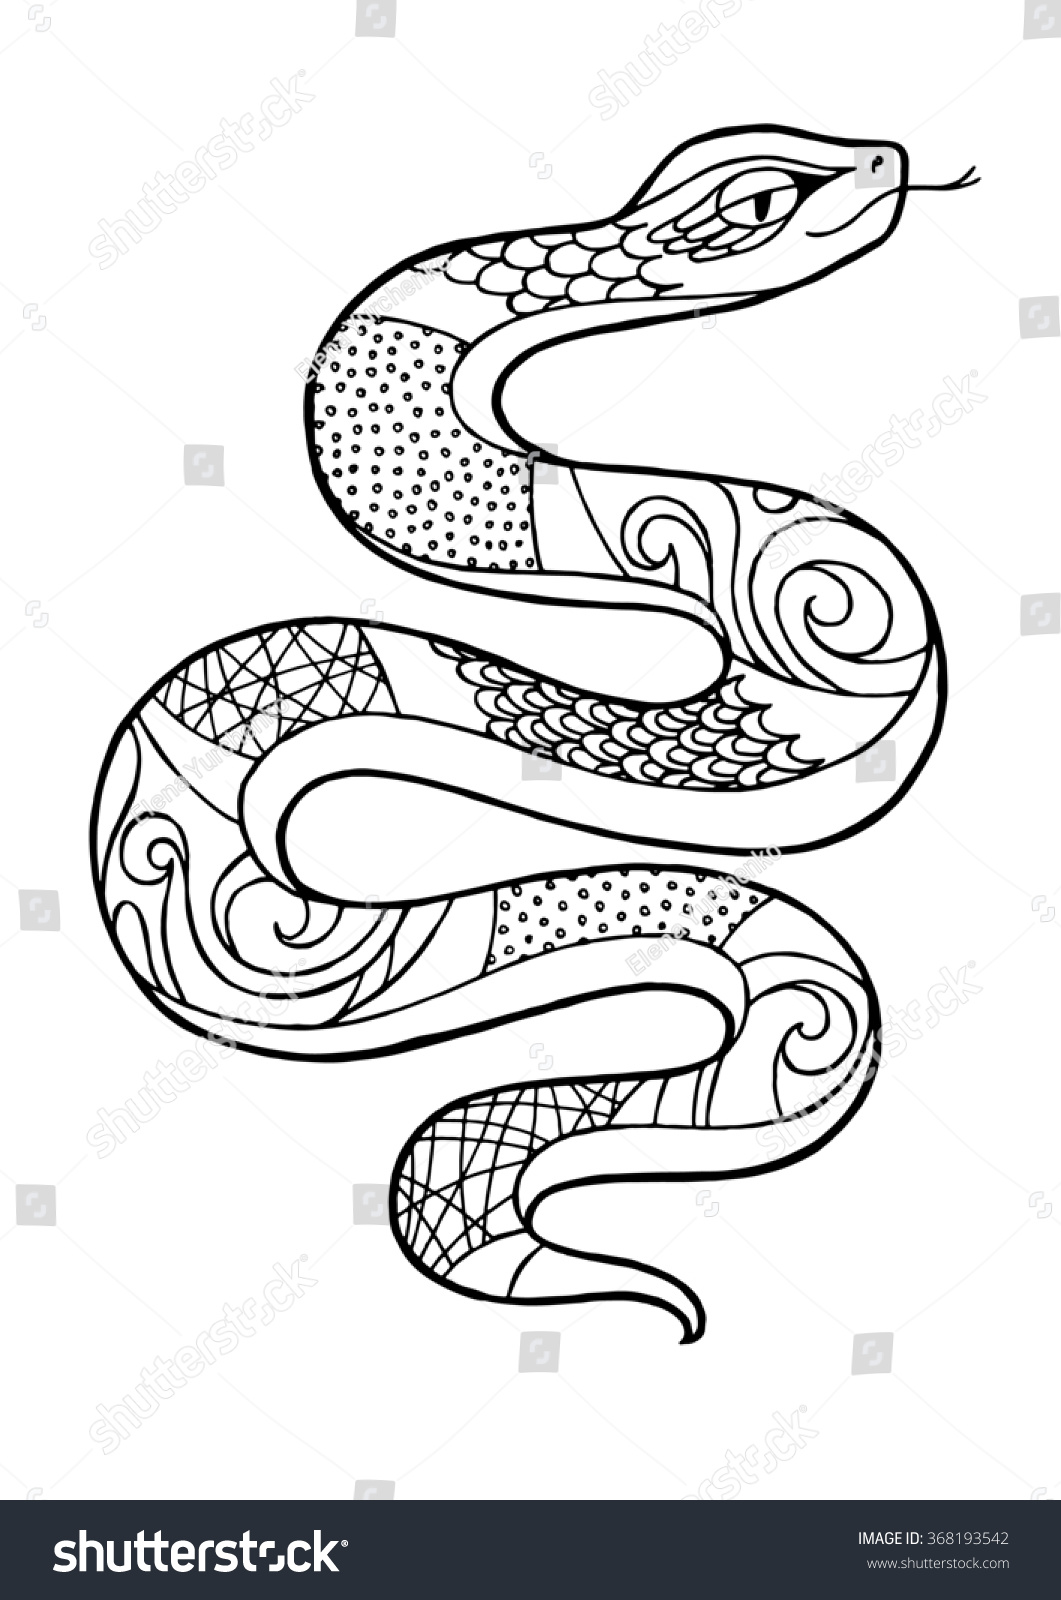 coloring page with ornamented snake coloring for kids and adults